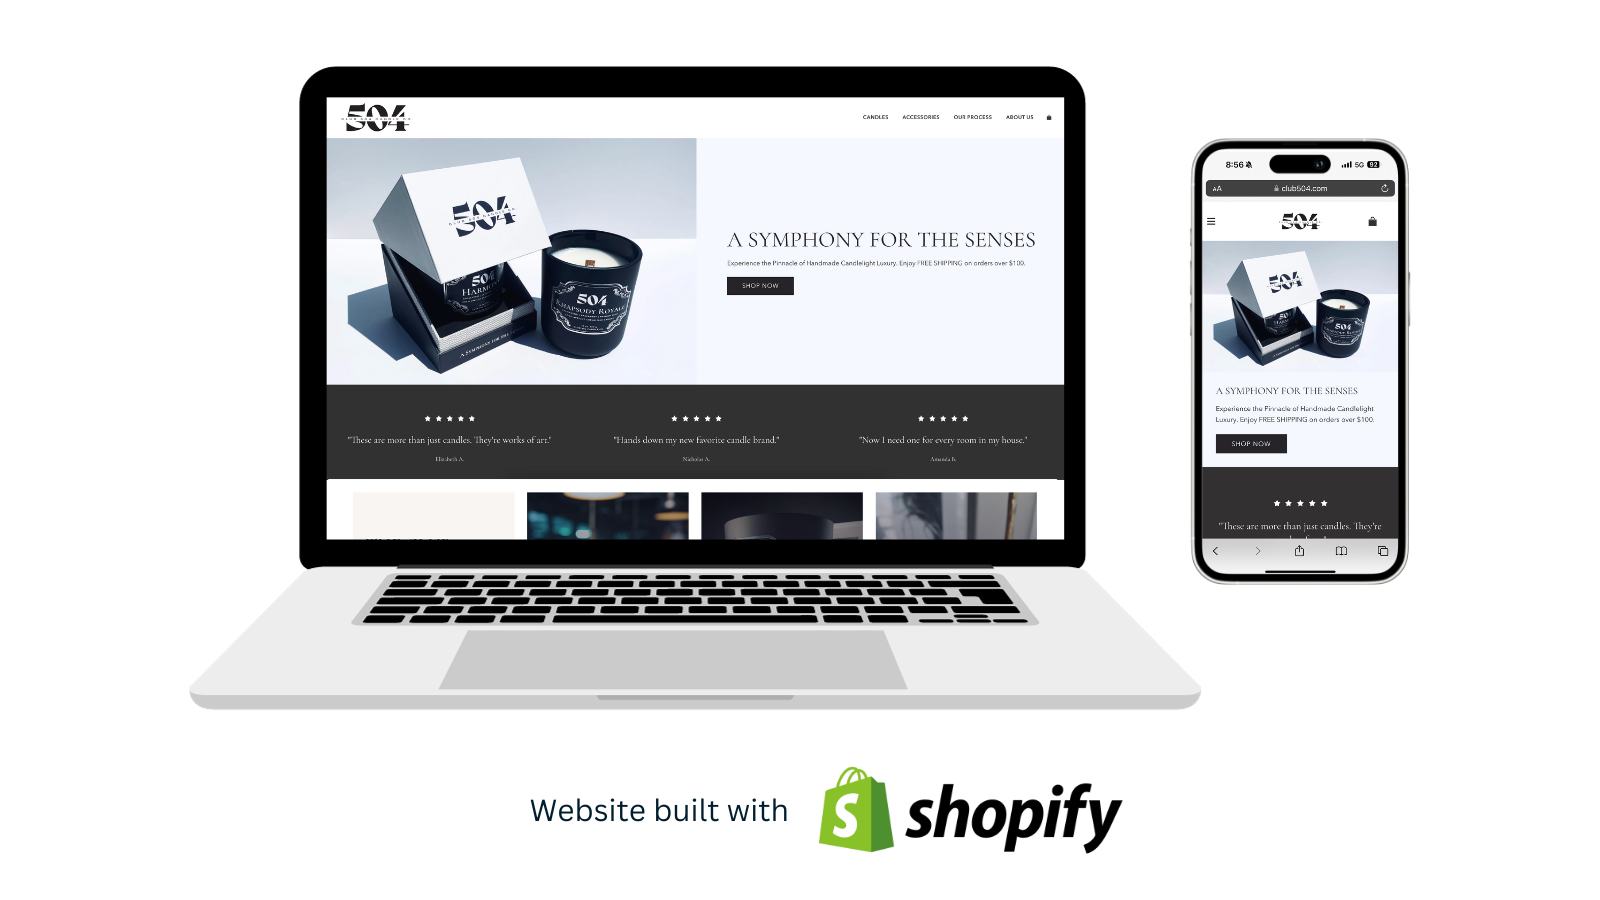 Laptop and iPhone mockups of the Club 504 website, built with Shopify